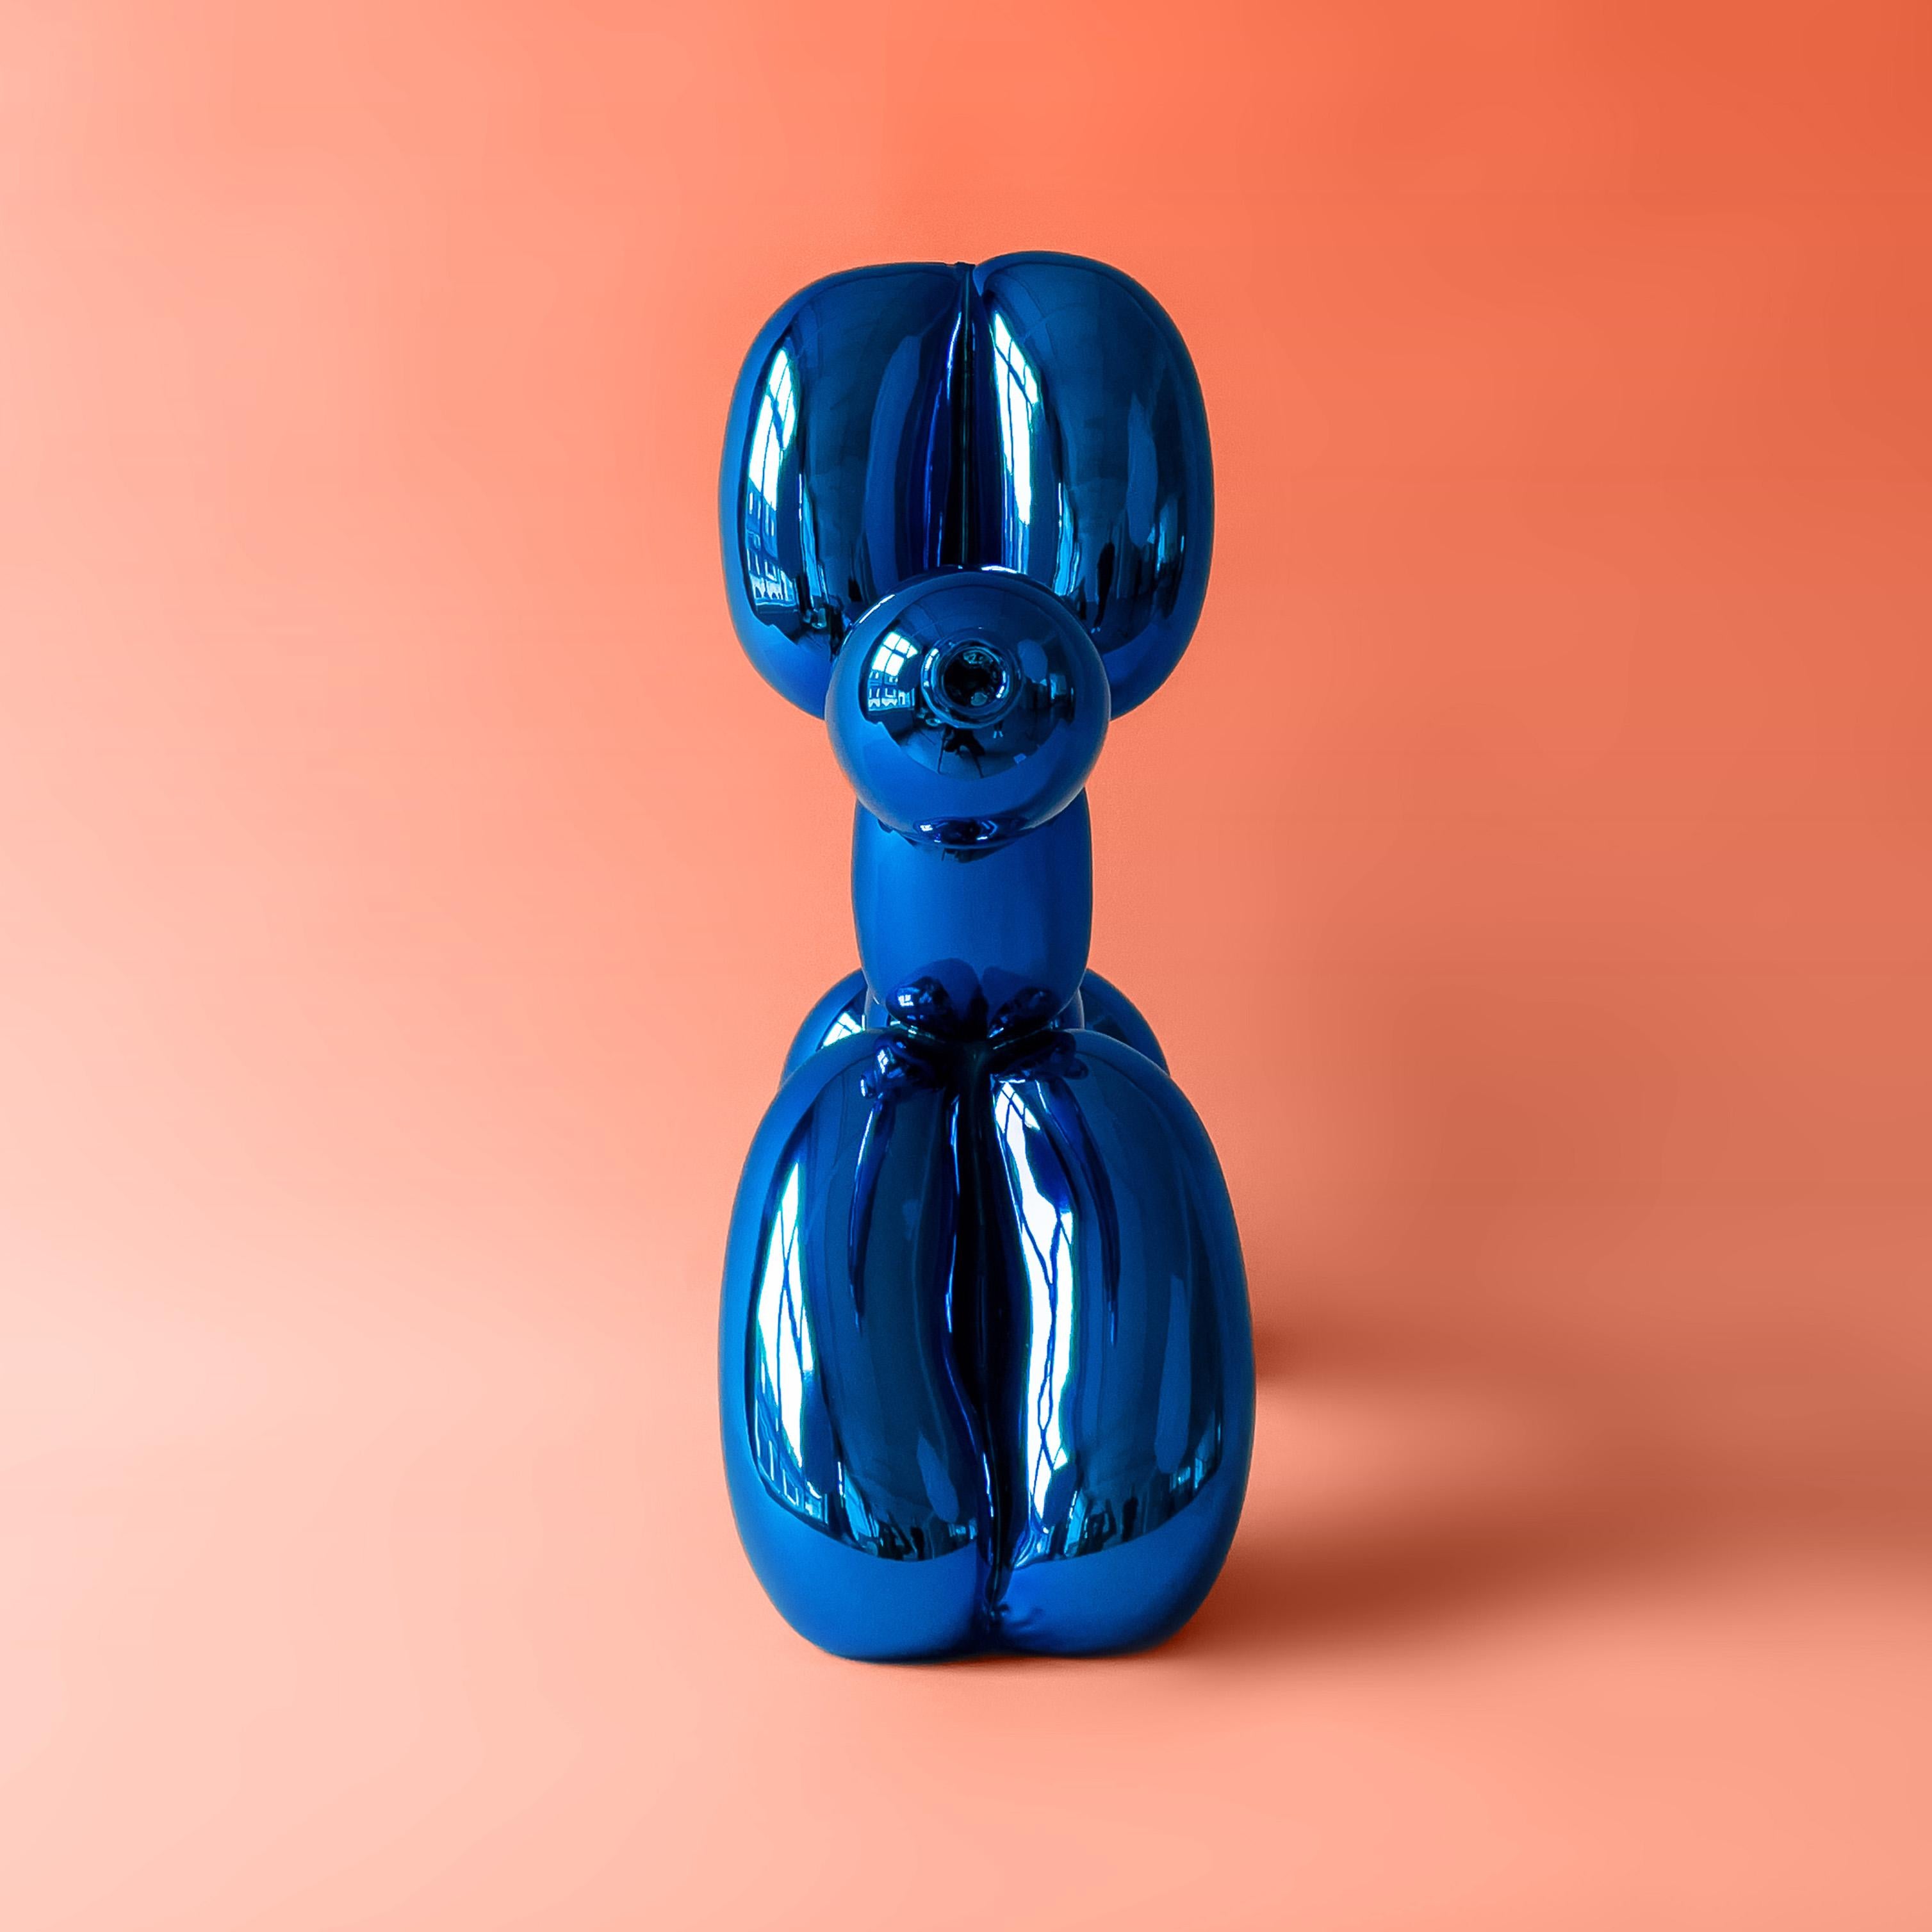 Blue Balloon Dog Sculpture by Jeff Koons, Porcelain, Contemporary Art For Sale 4